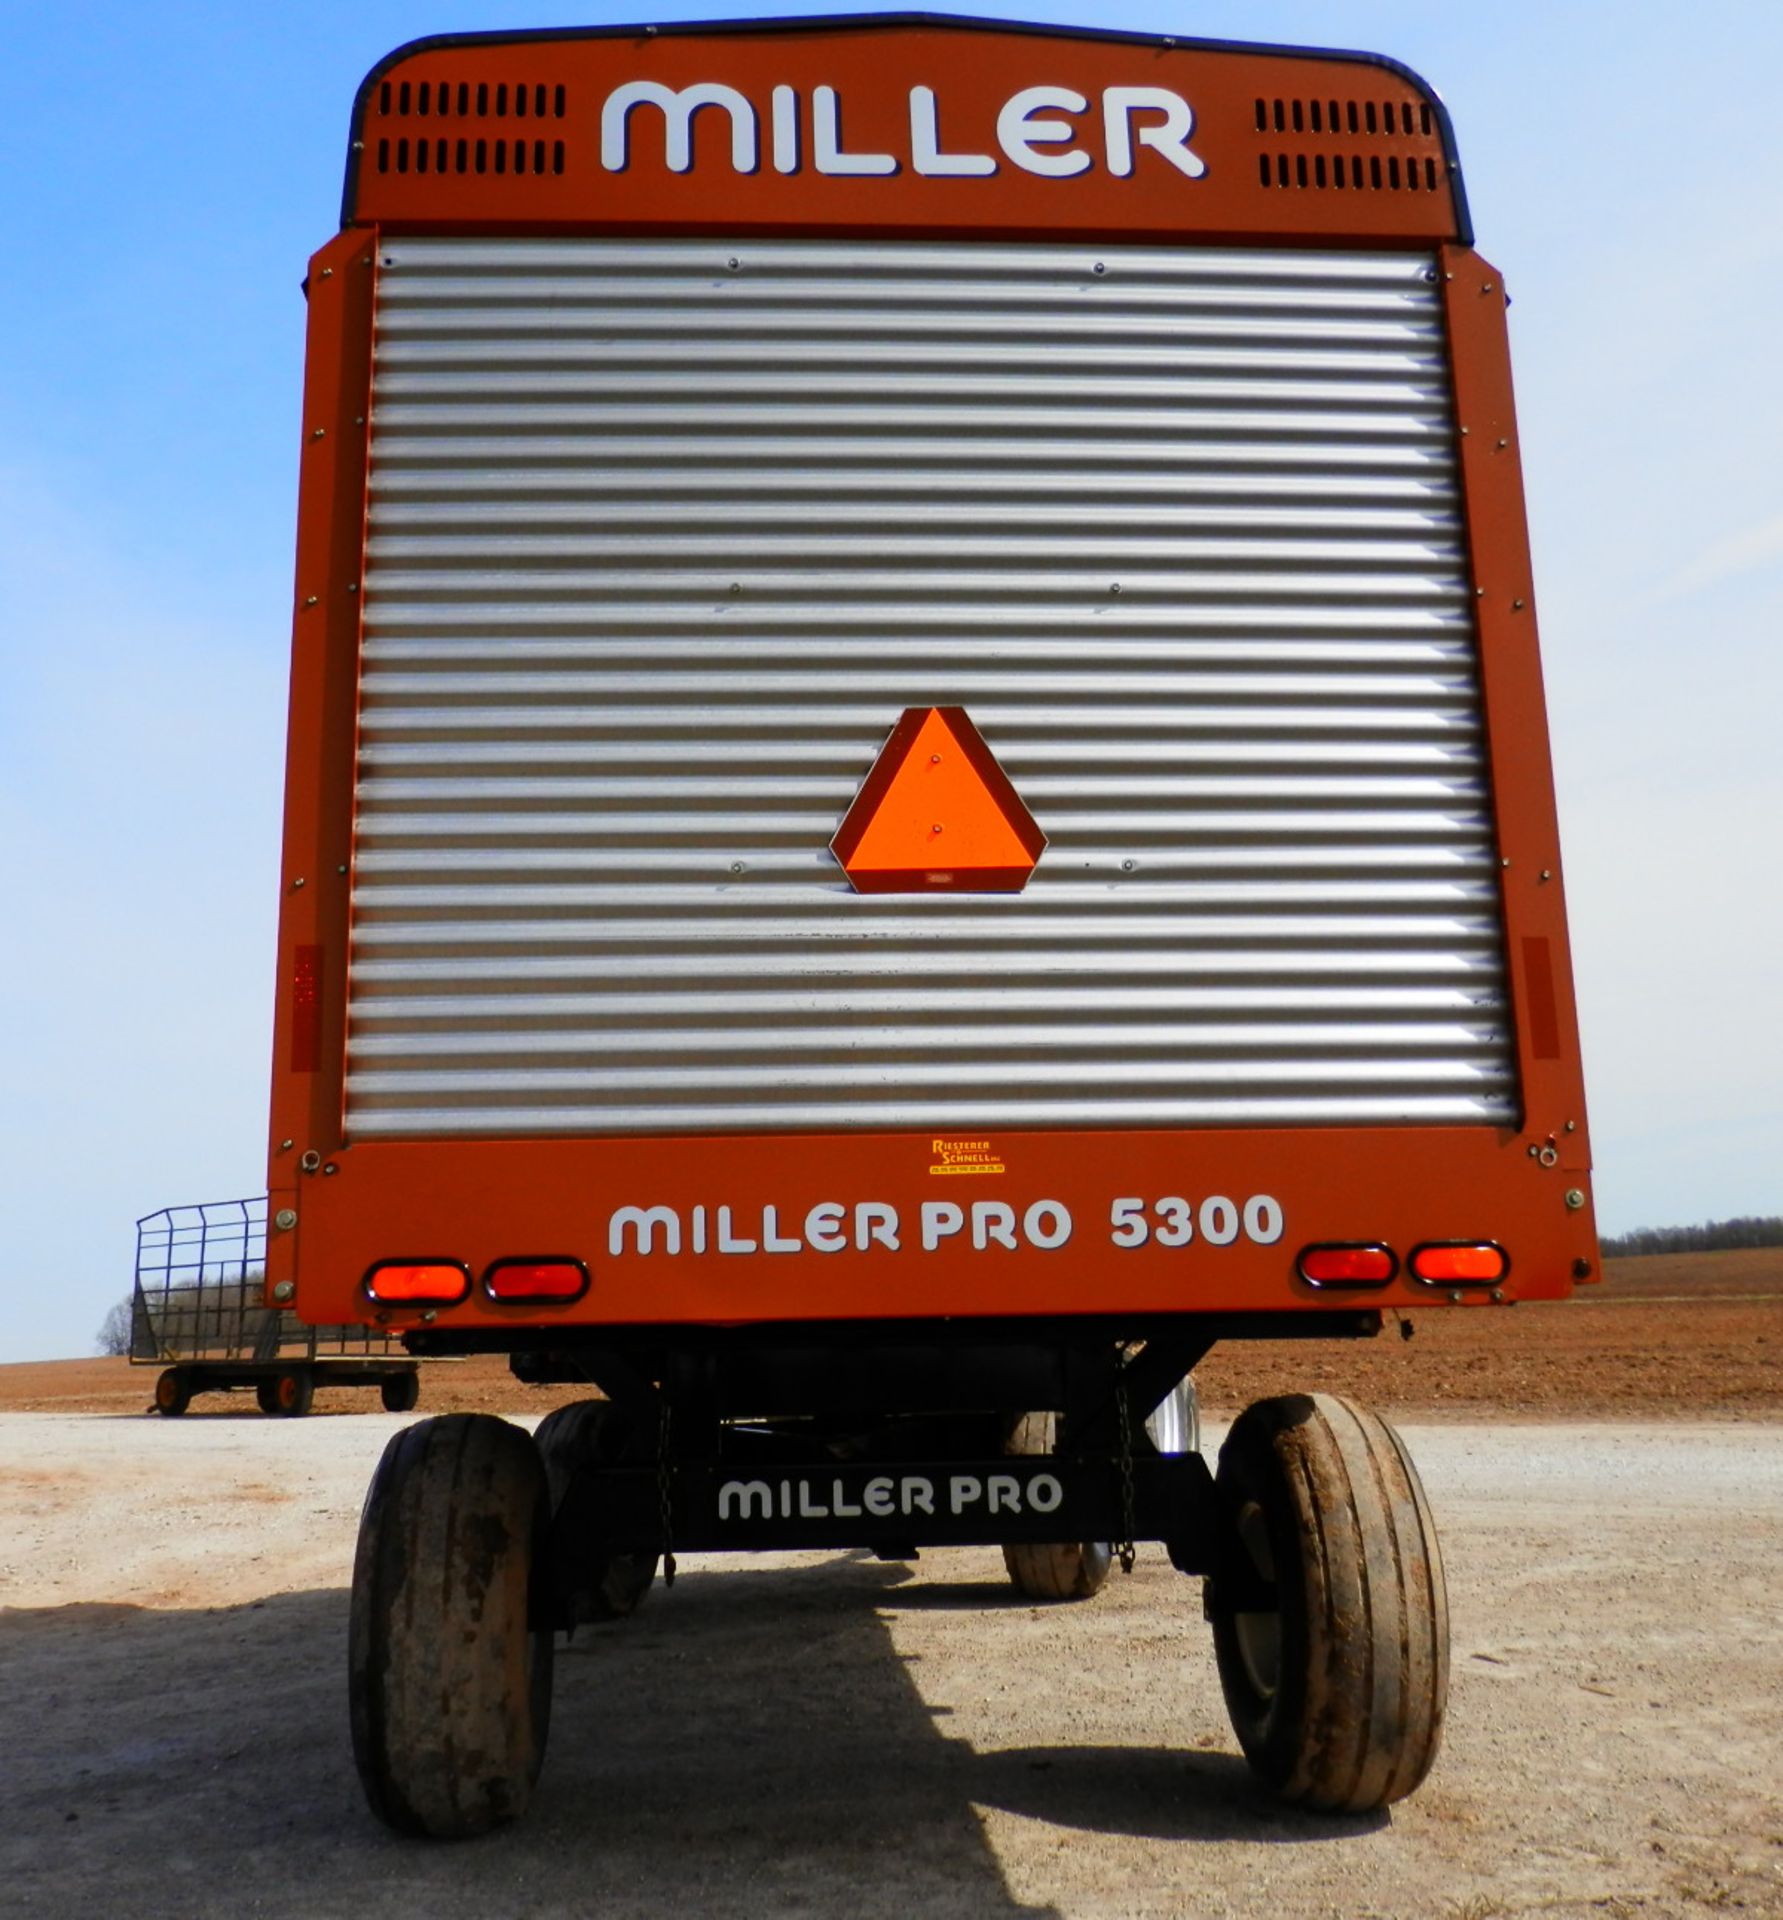 MILLER PRO 5300 18' LH FORAGE WAGON (Yellow Decal) - Image 6 of 7